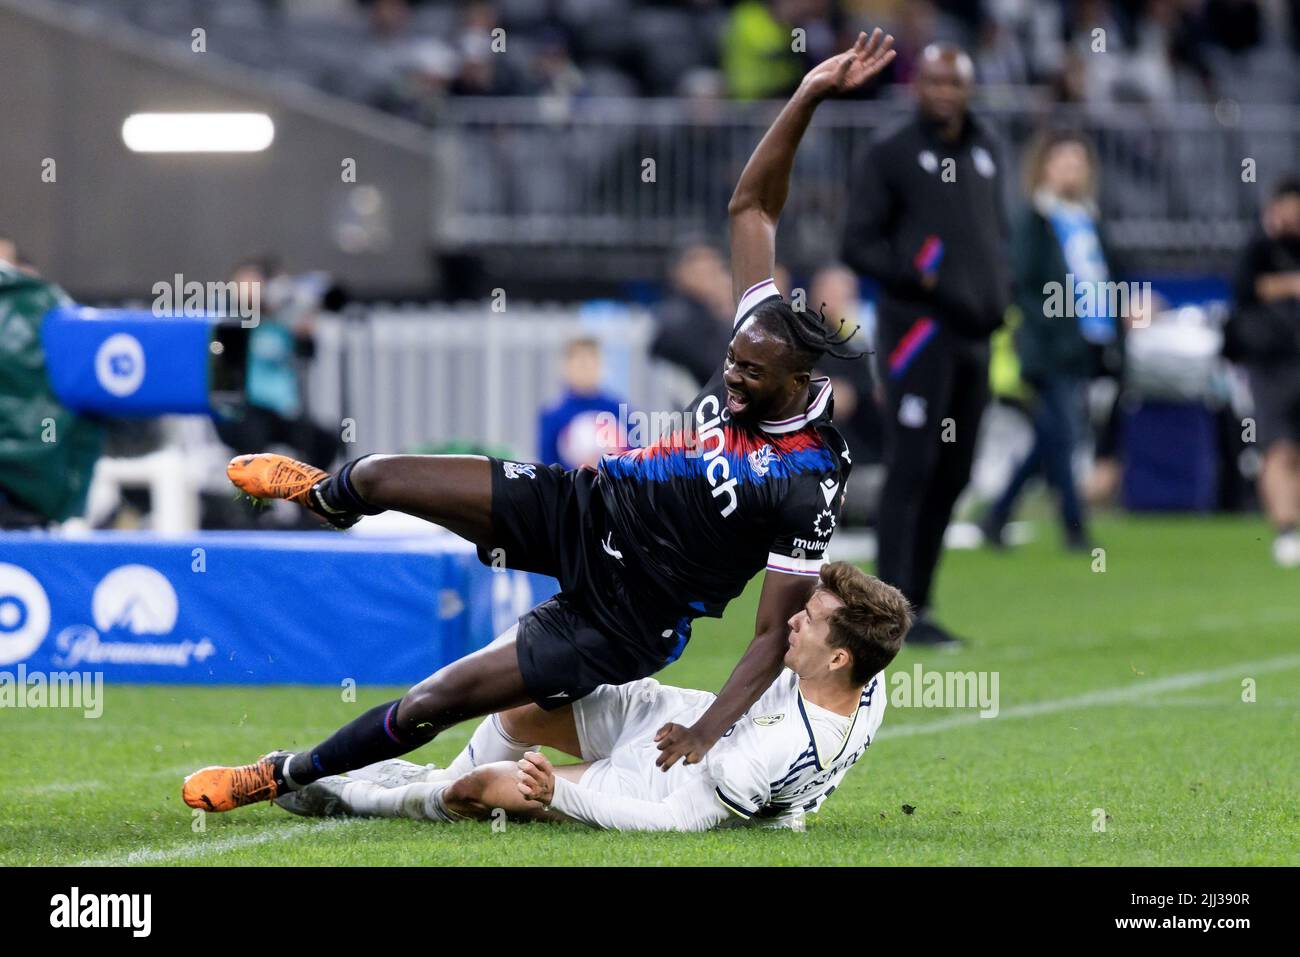 Perth, Australia, 22 July, 2022. Jean-Philippe Mateta of Crystal Palace is tackled by Diego Llorente of Leeds United during the ICON Festival of International Football match between Crystal Palace and Leeds United at Optus Stadium on July 22, 2022 in Perth, Australia. Credit: Graham Conaty/Speed Media/Alamy Live News Stock Photo